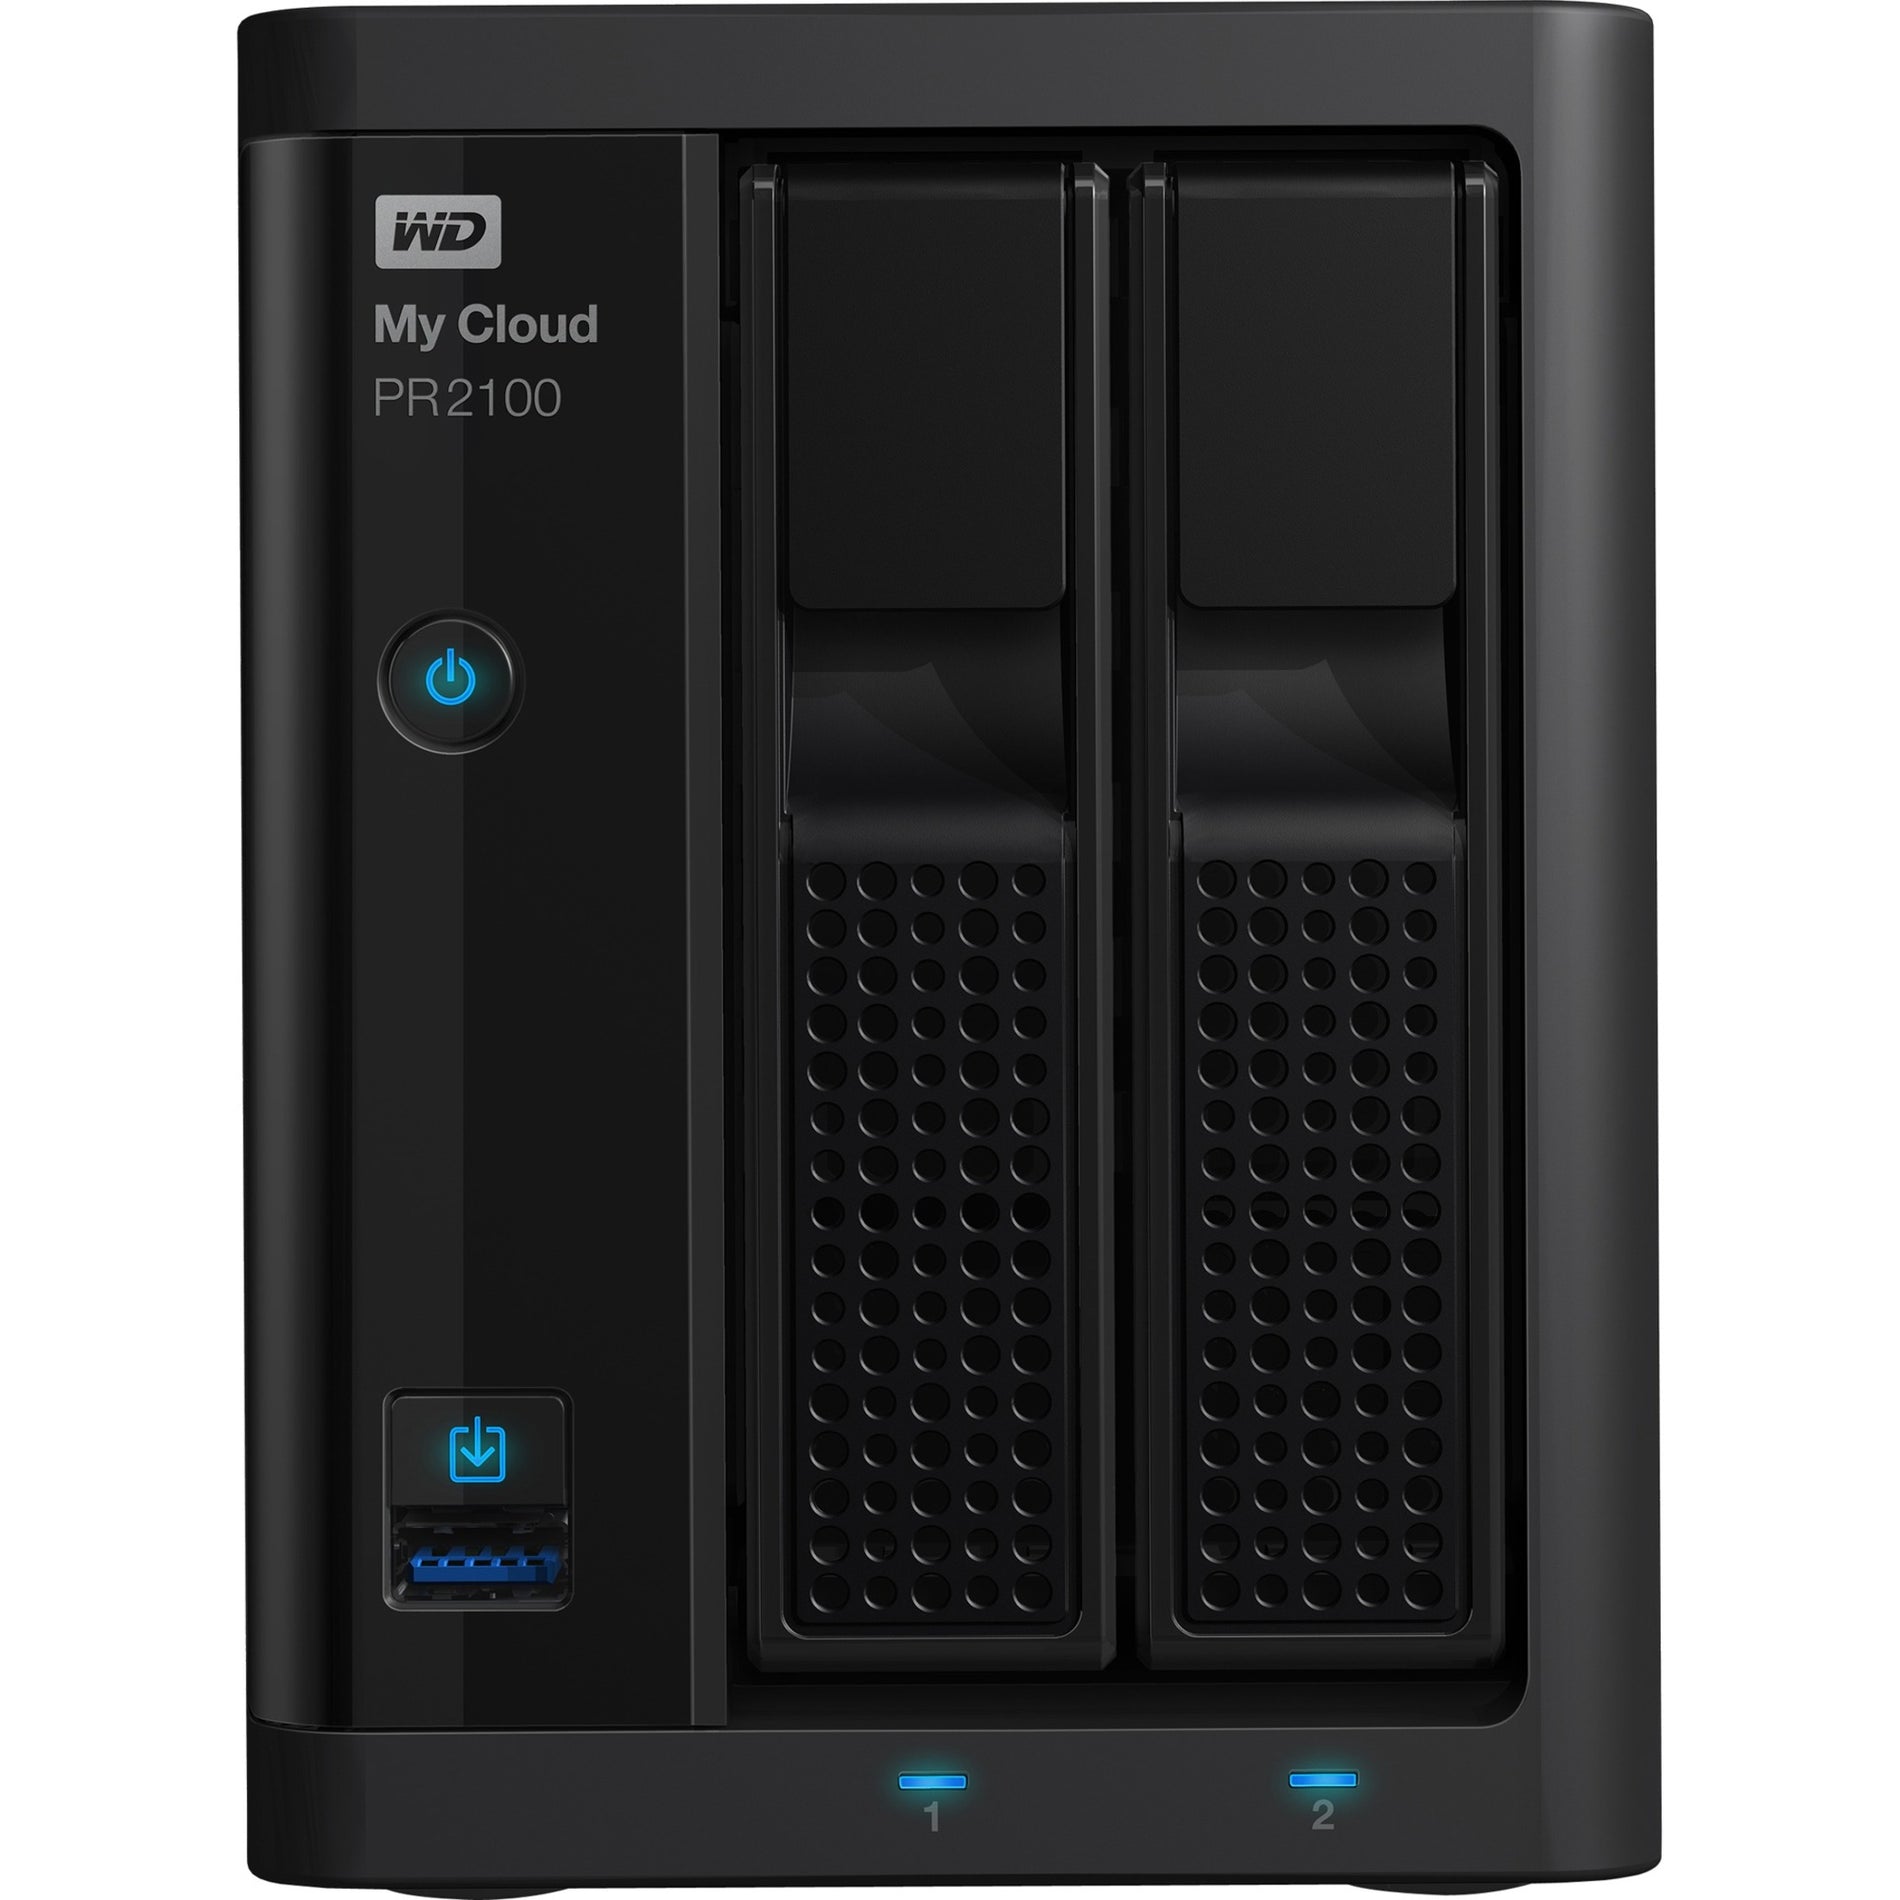 WD WDBBCL0000NBK-NESN 0TB My Cloud PR2100 Pro Series Diskless Media Server with Transcoding, NAS - Network Attached Storage